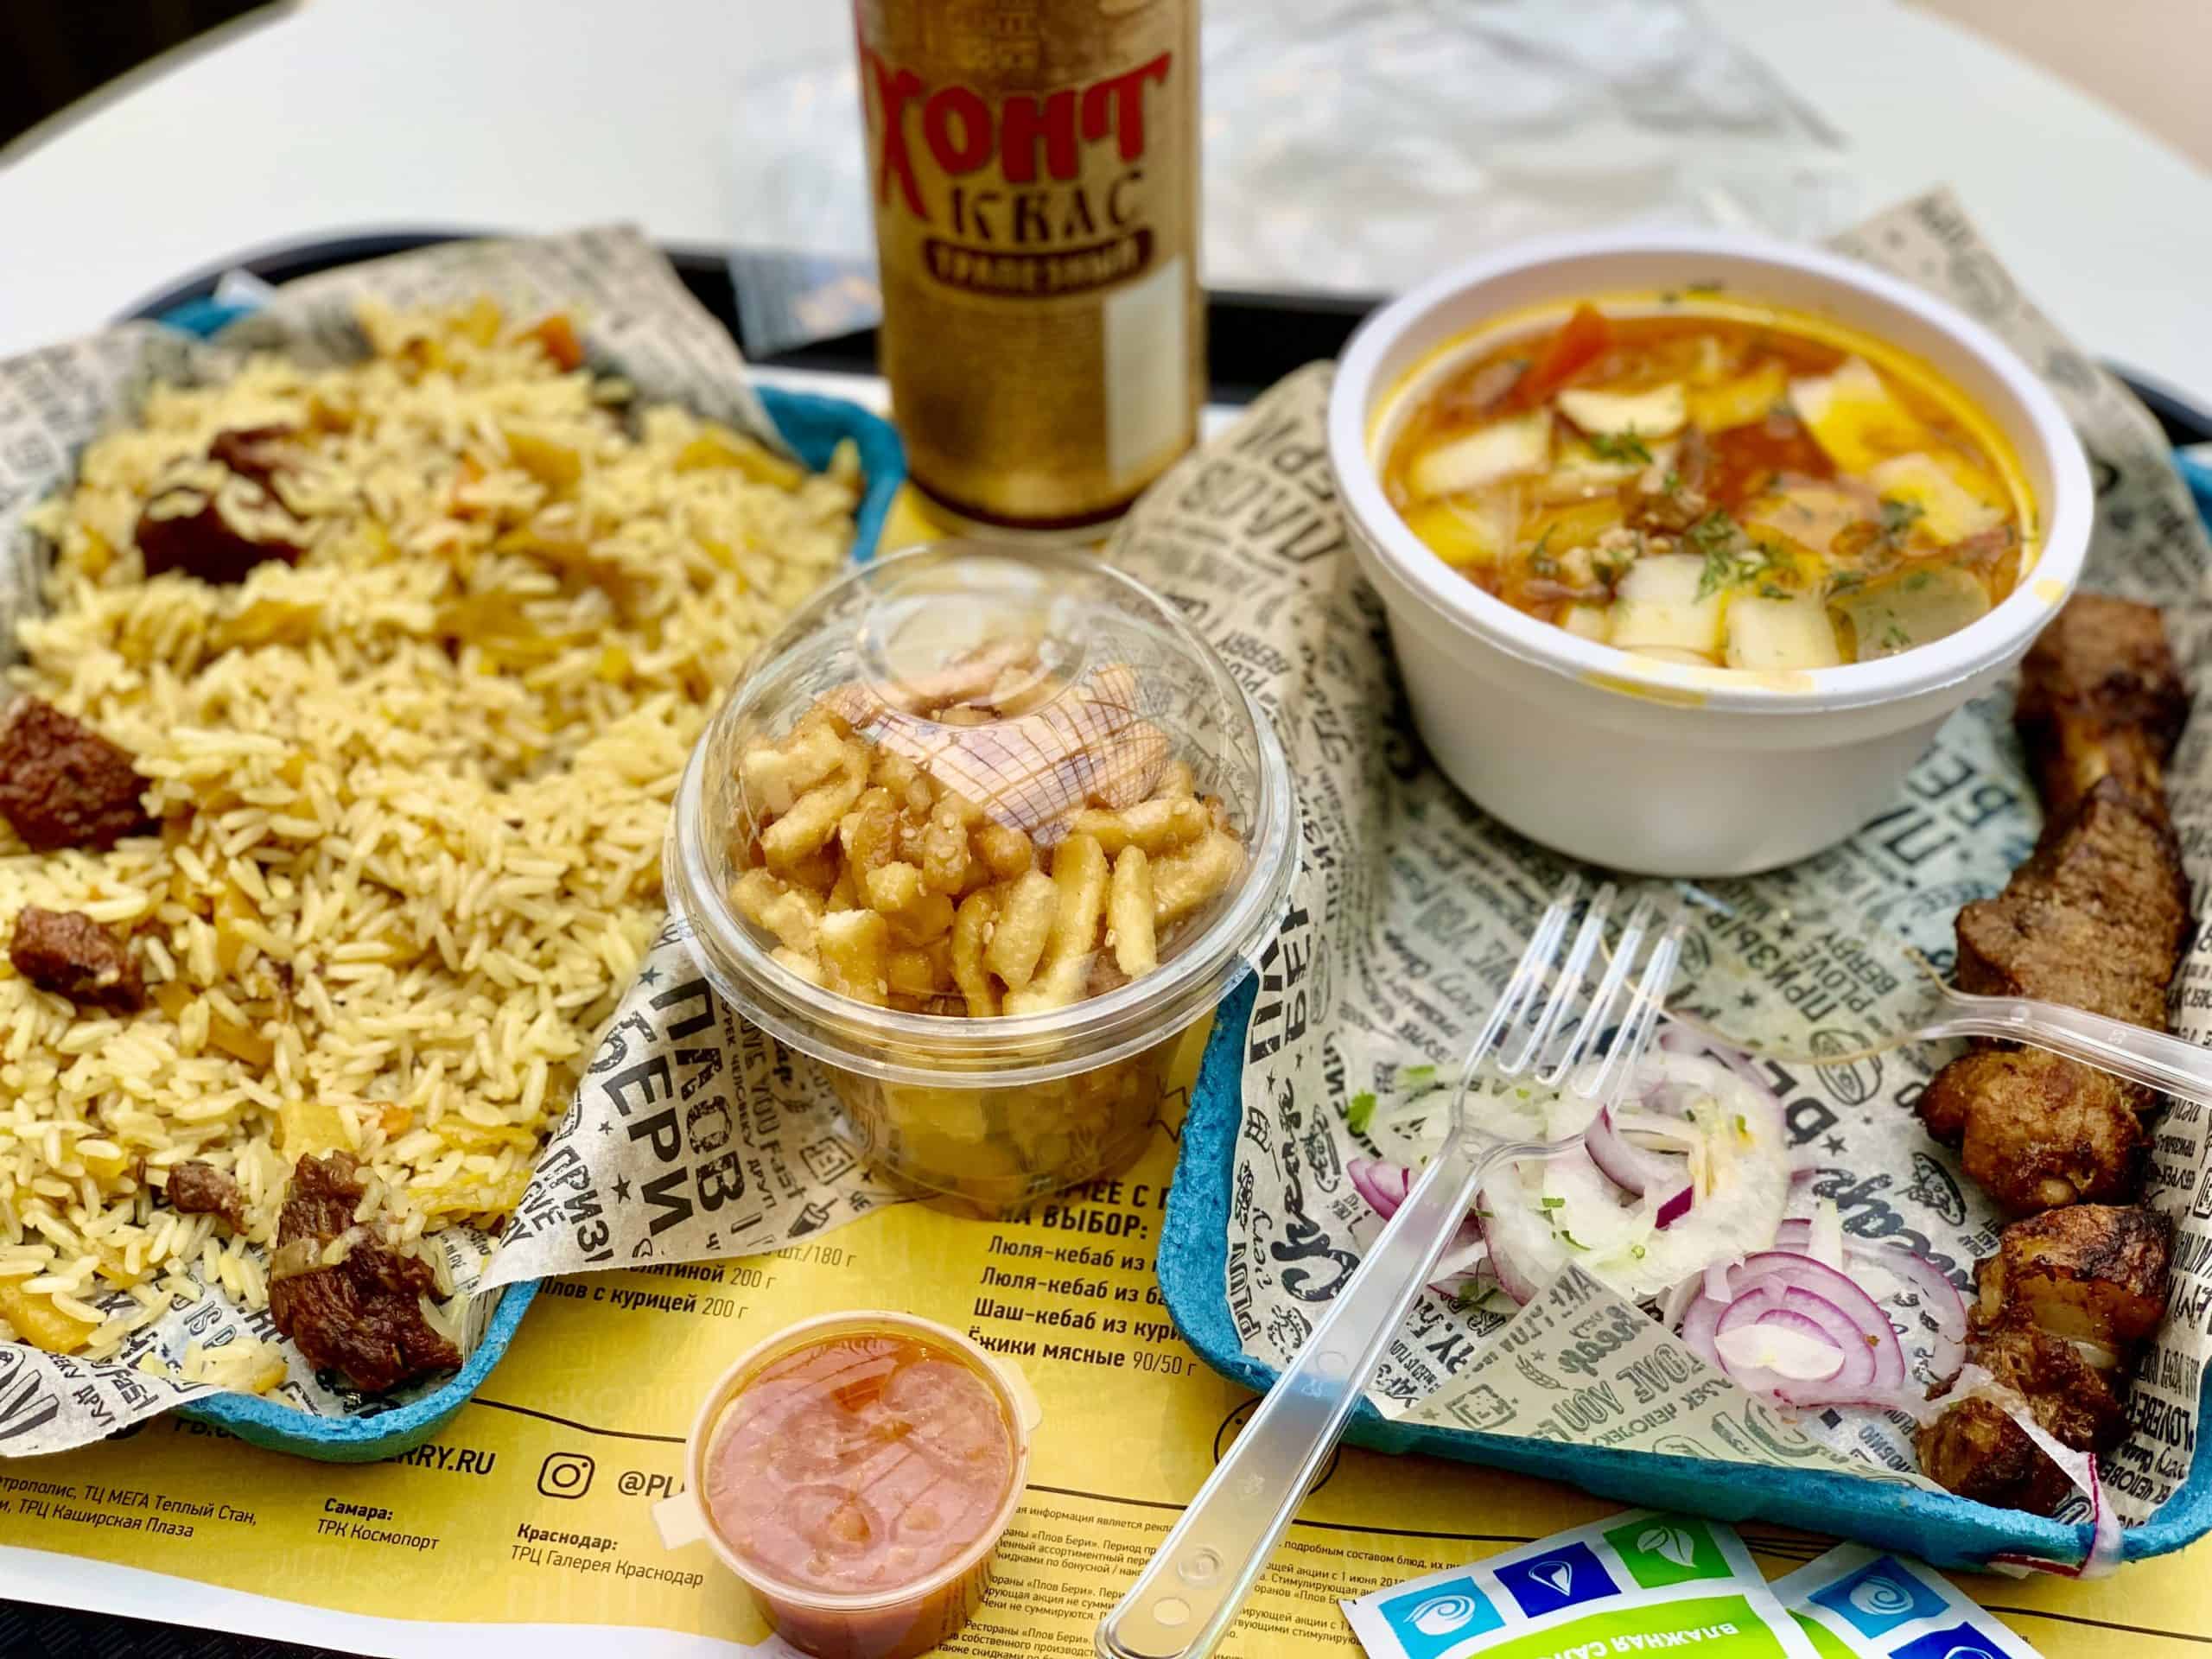 lunch from food court at Aviapark mall, plov, laghman, chak-chak and shashlik